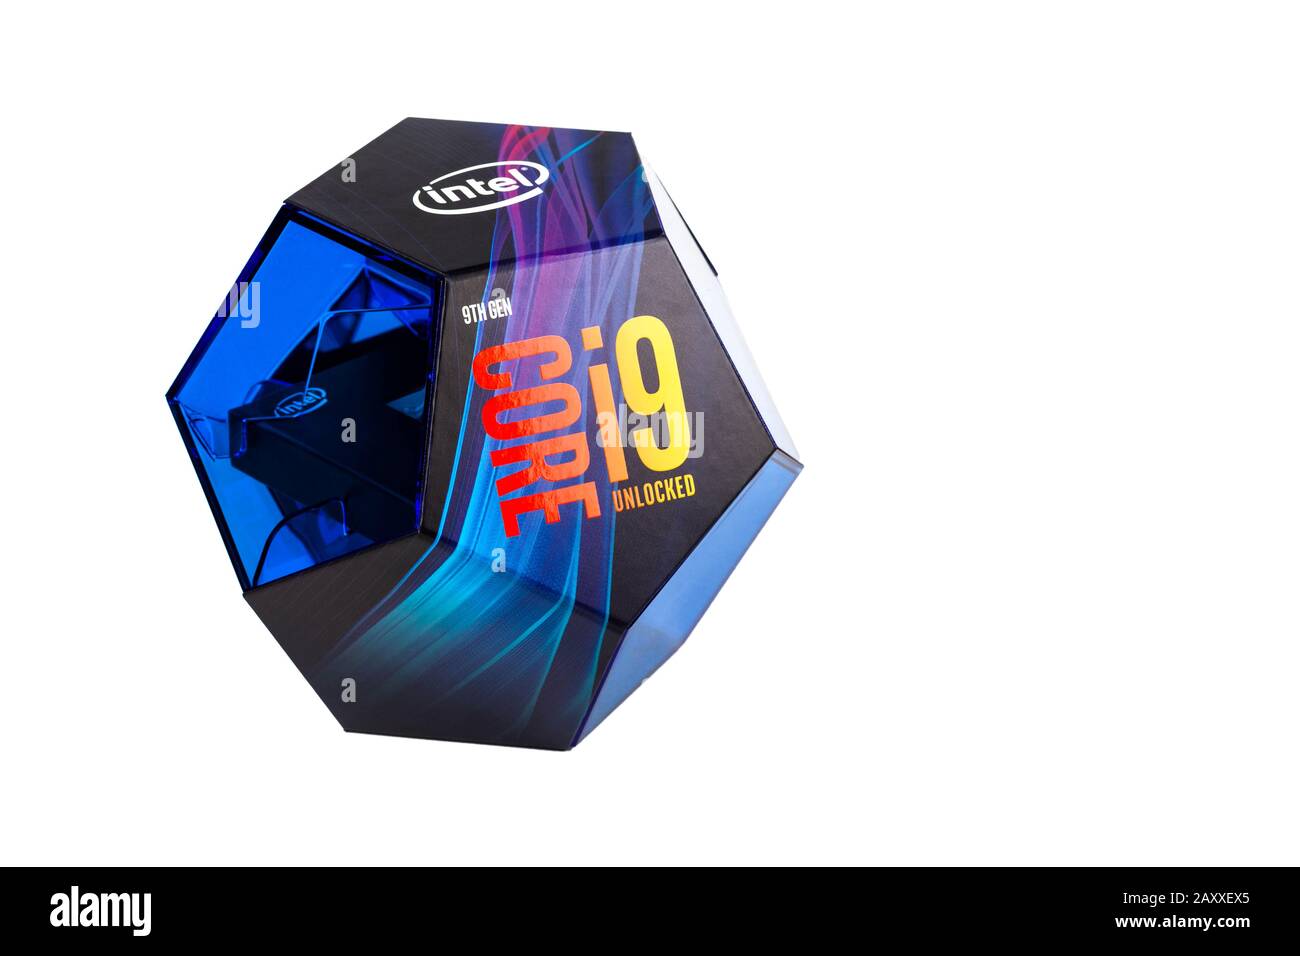 Intel Core i9 9900k CPU, modern 5ghz Coffee Lake processor in a original blue box product shot isolated on white Gaming productivity modern components Stock Photo